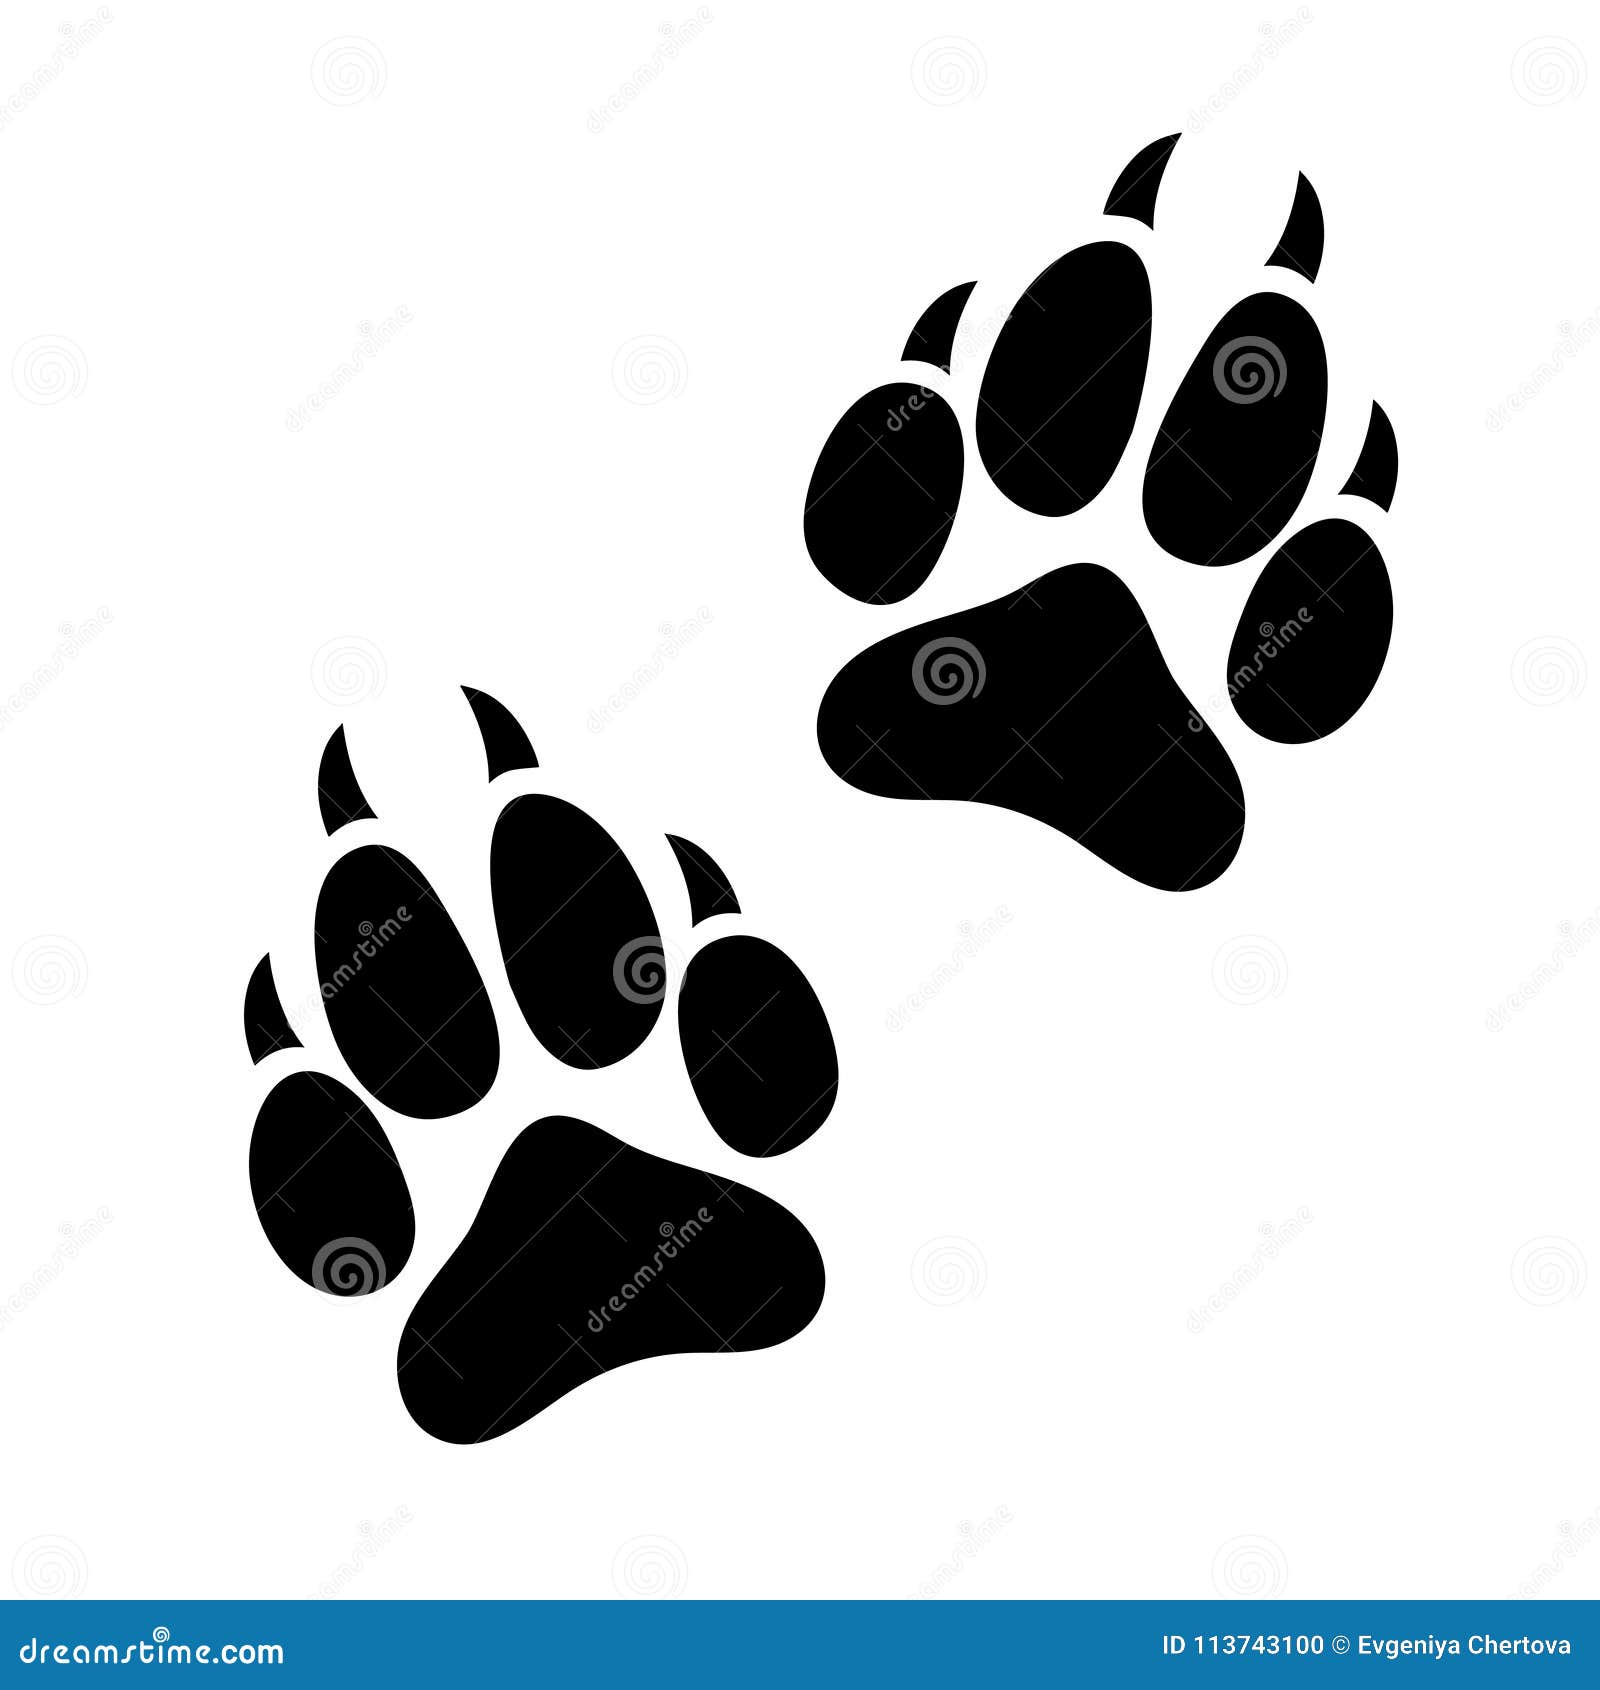 Paw Print Animal Dog or Cat Clawed, Silhouette Footprints of an Animal,  Flat Icon, Logo, Black Traces Isolated on White Background Stock Vector -  Illustration of isolated, nature: 113743100